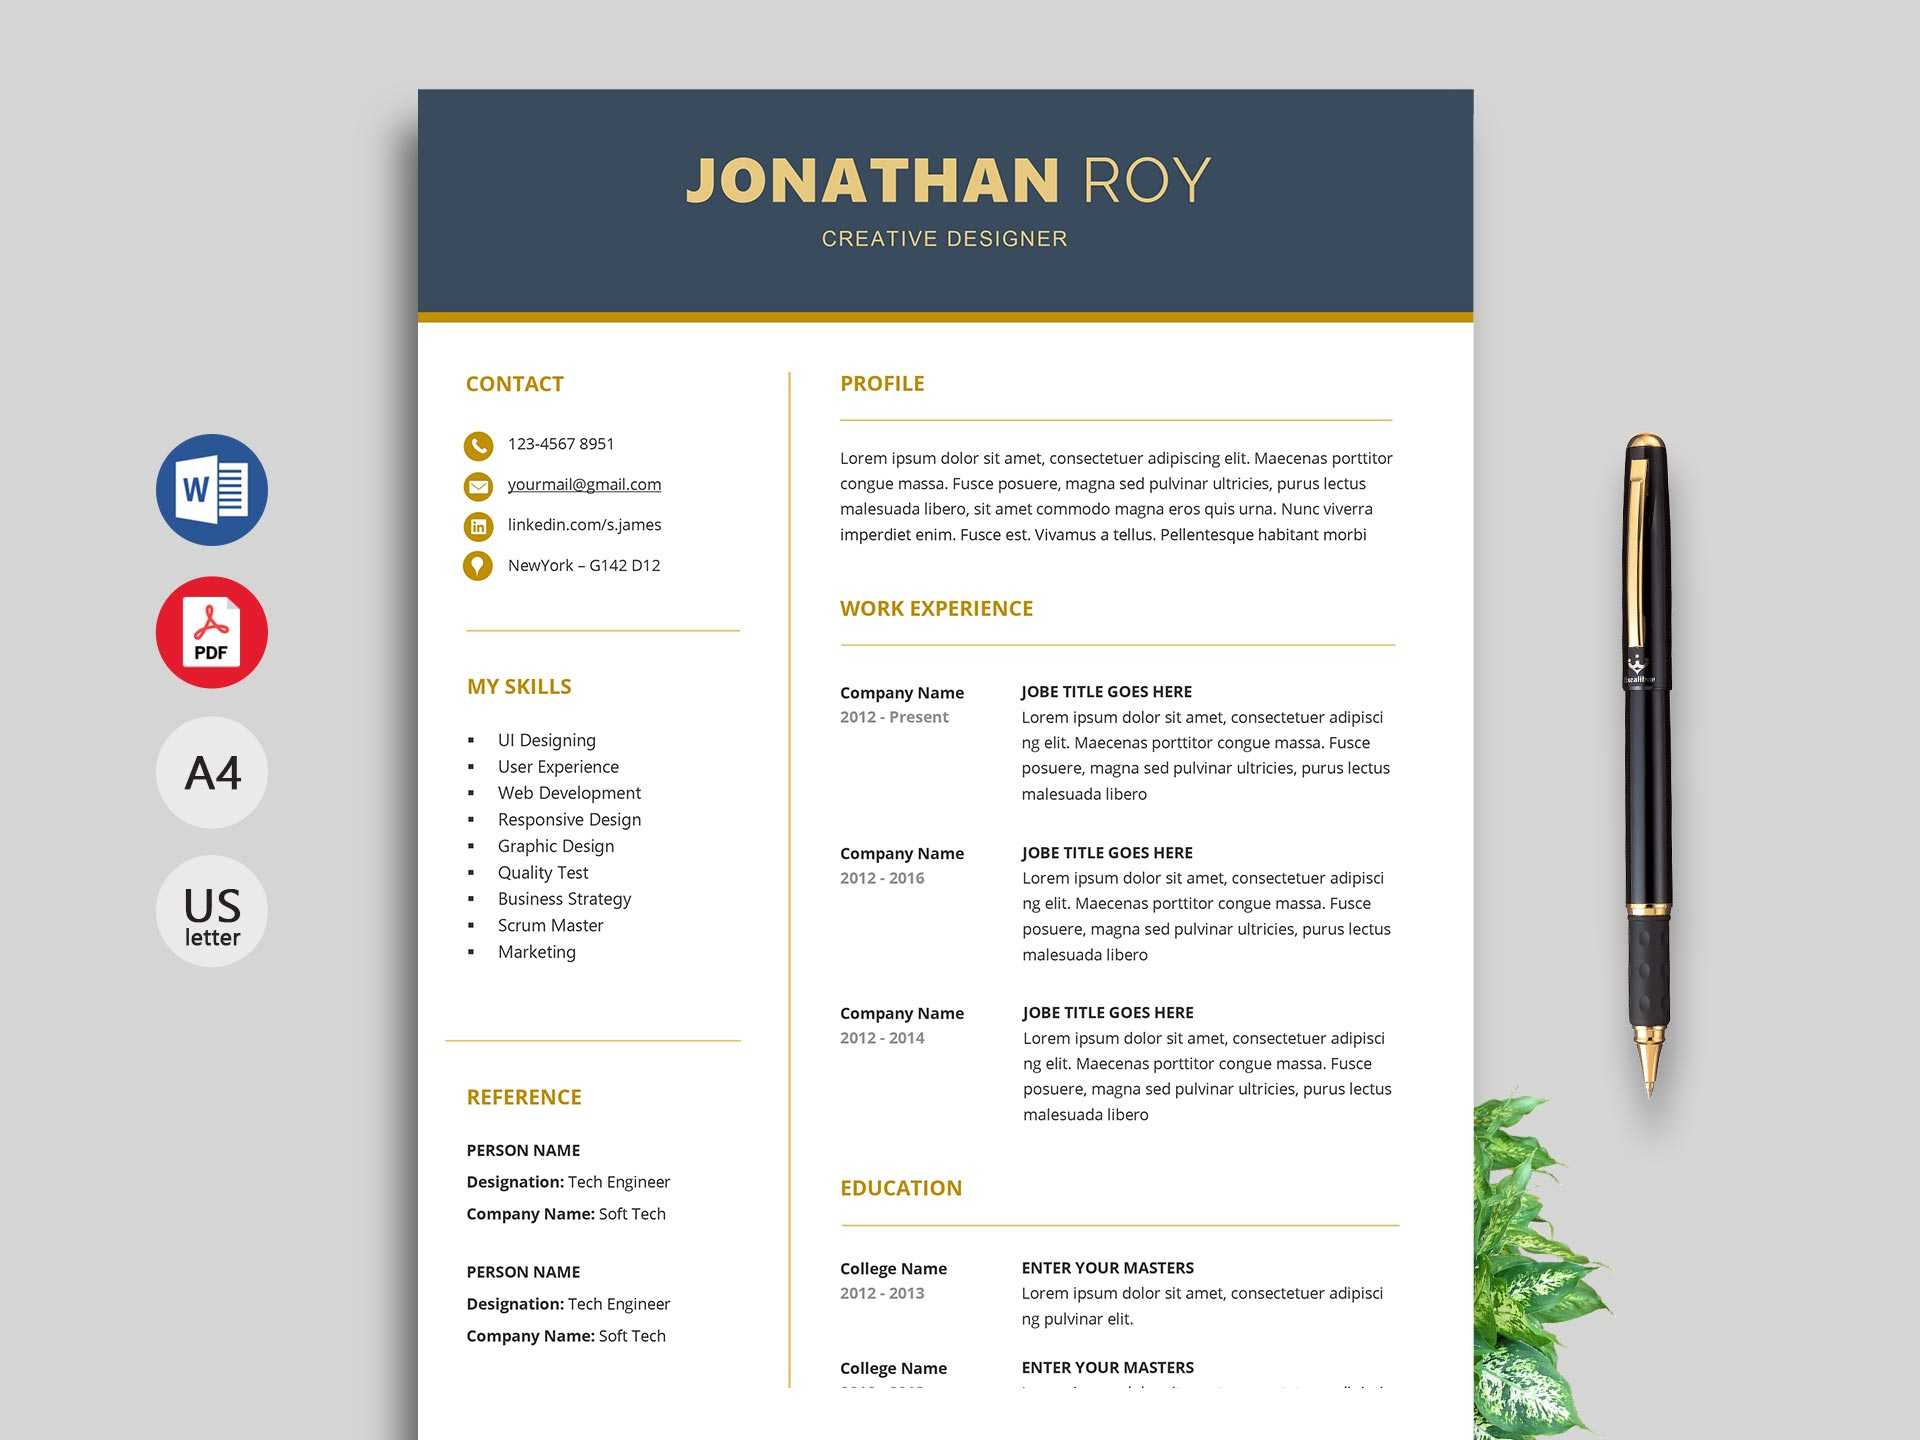 Free Simple Resume & Cv Templates Word Format 2020 | Resumekraft Throughout How To Get A Resume Template On Word